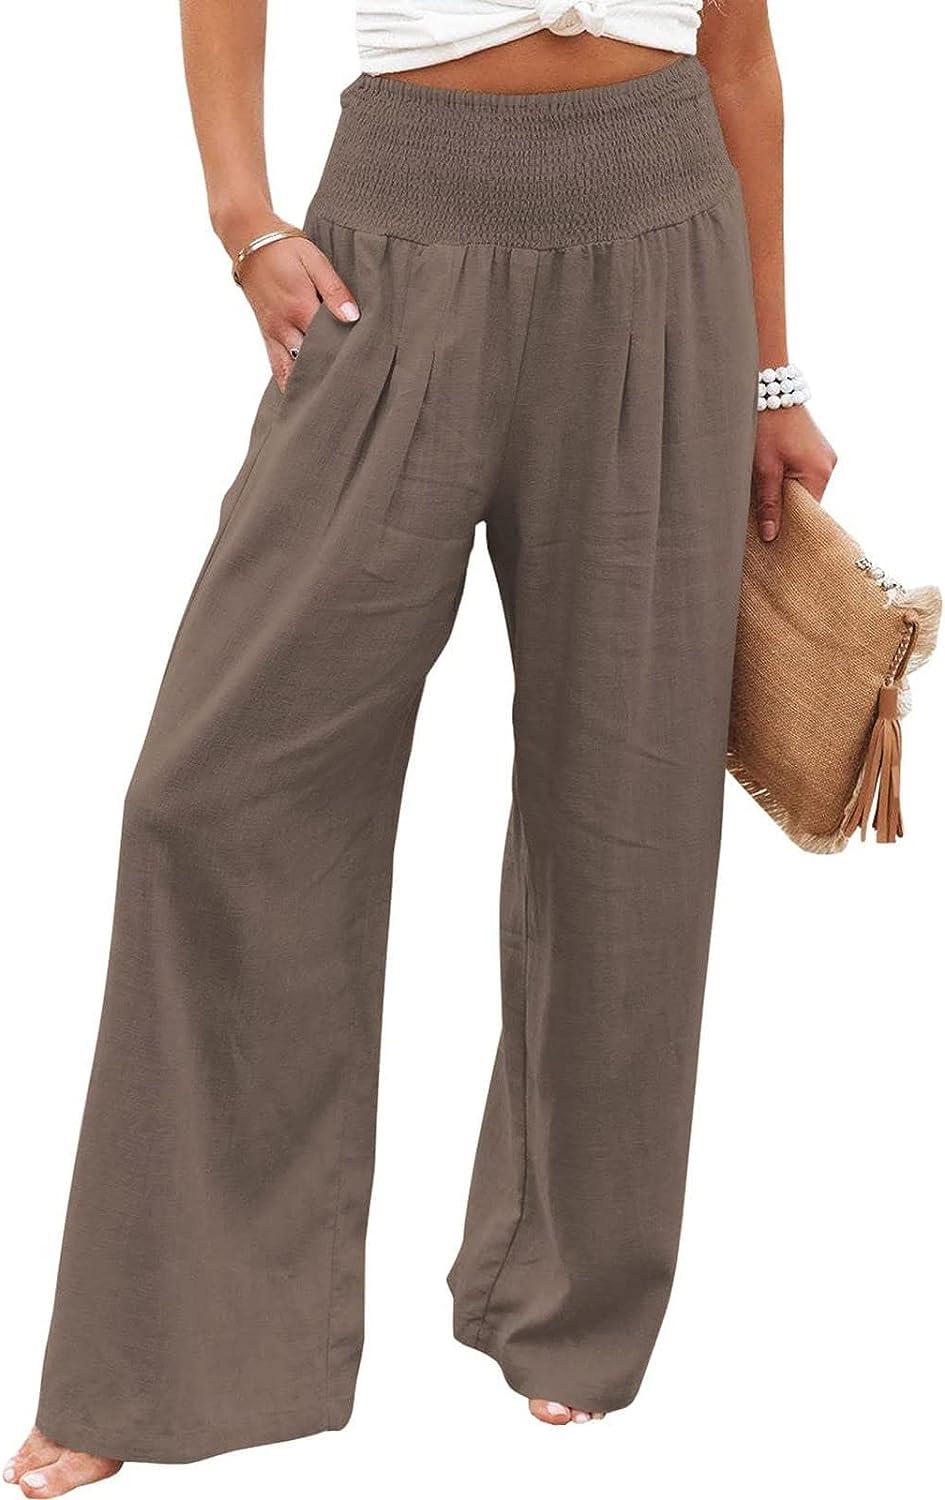 Women's Straight Leg Relaxed Cargo Pants Pockets Casual High Waist Elastic  Buttop Cotton Linen Trousers for